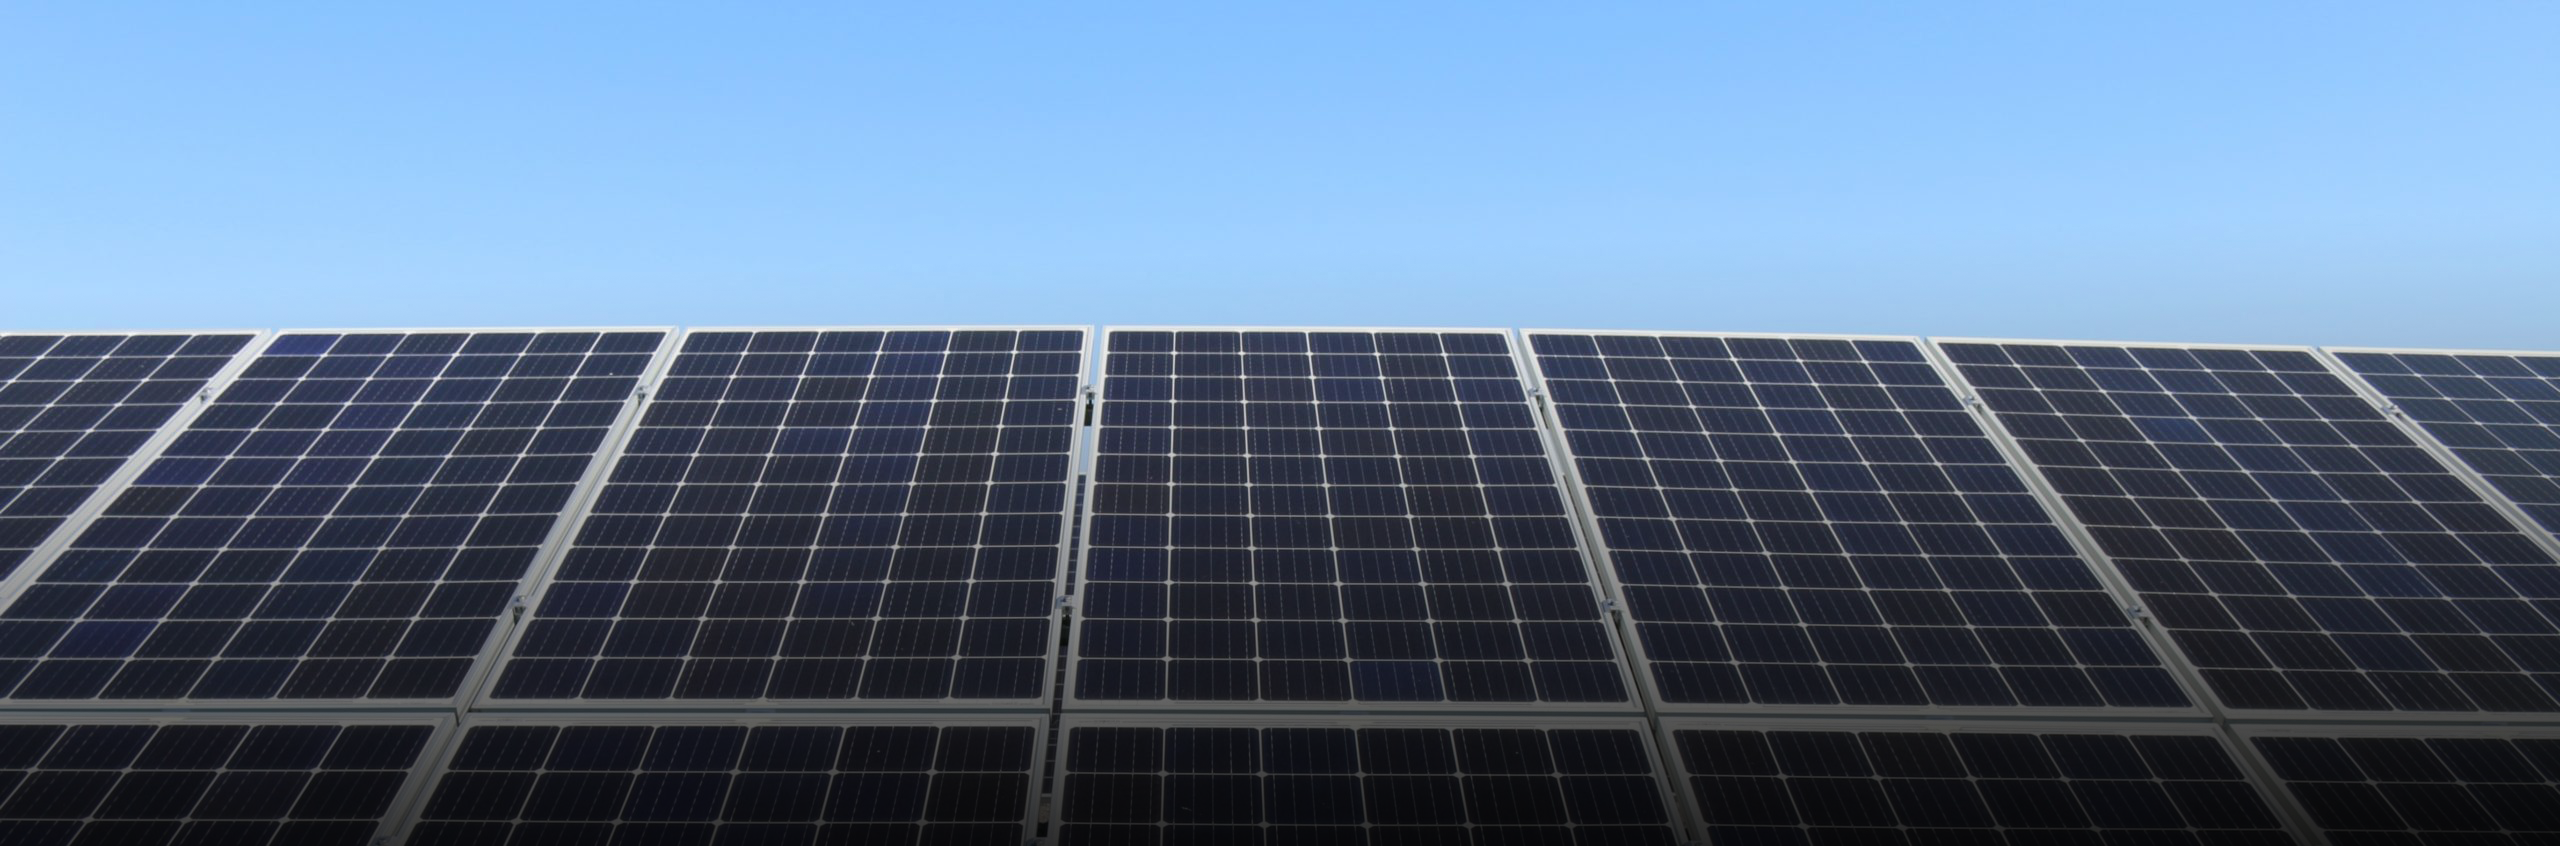 Introducing solar photovoltaics (PV) for your business